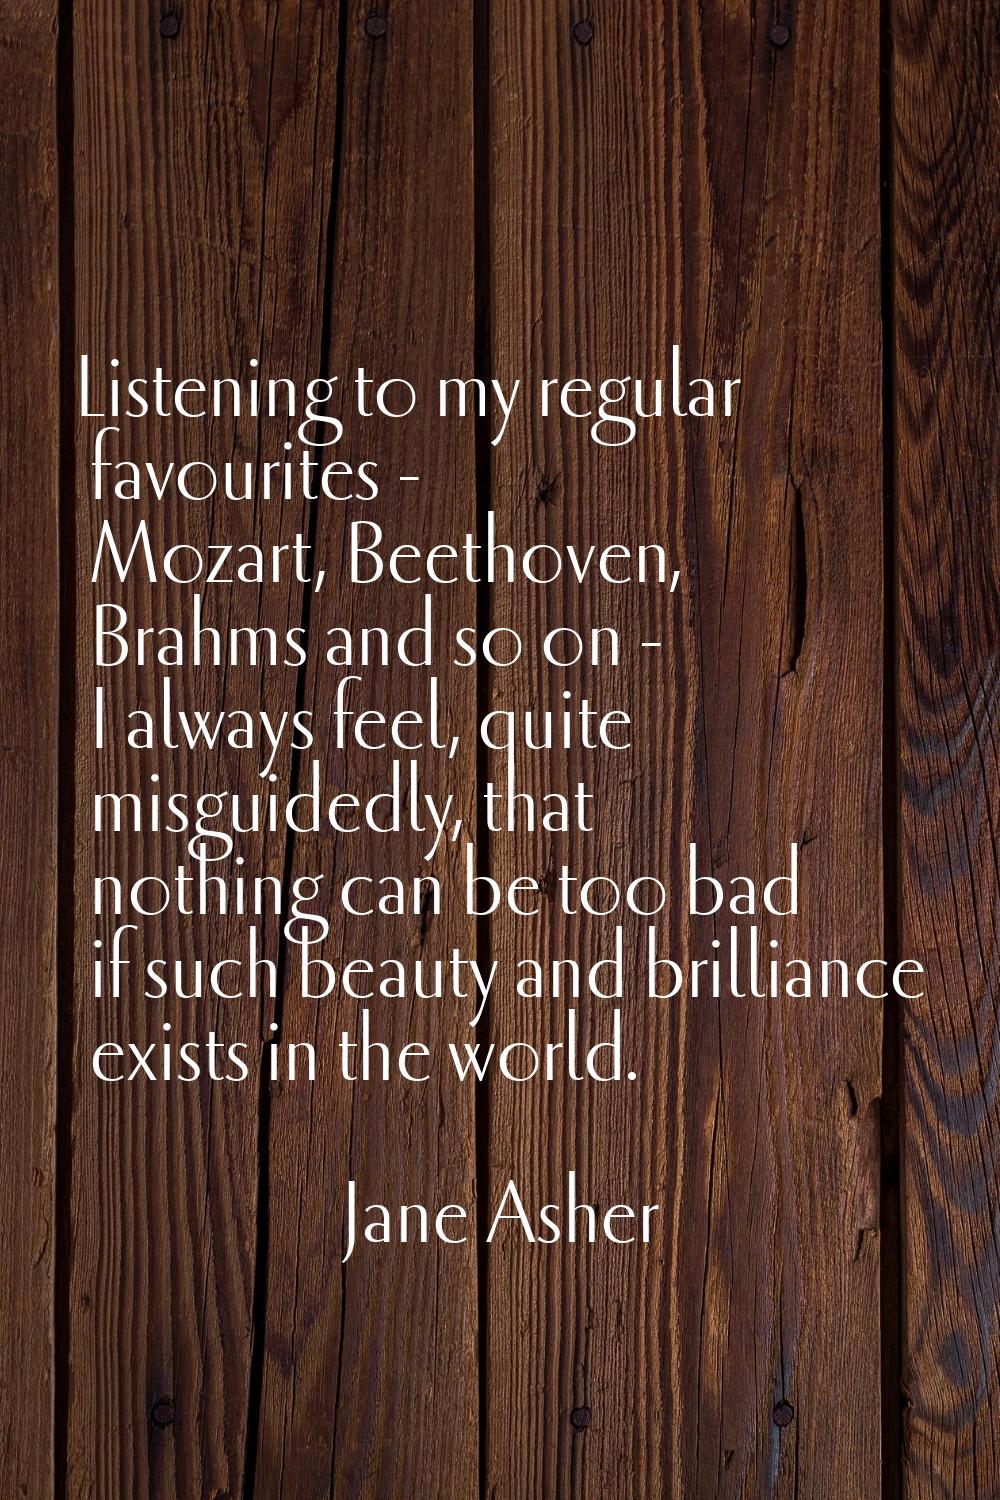 Listening to my regular favourites - Mozart, Beethoven, Brahms and so on - I always feel, quite mis